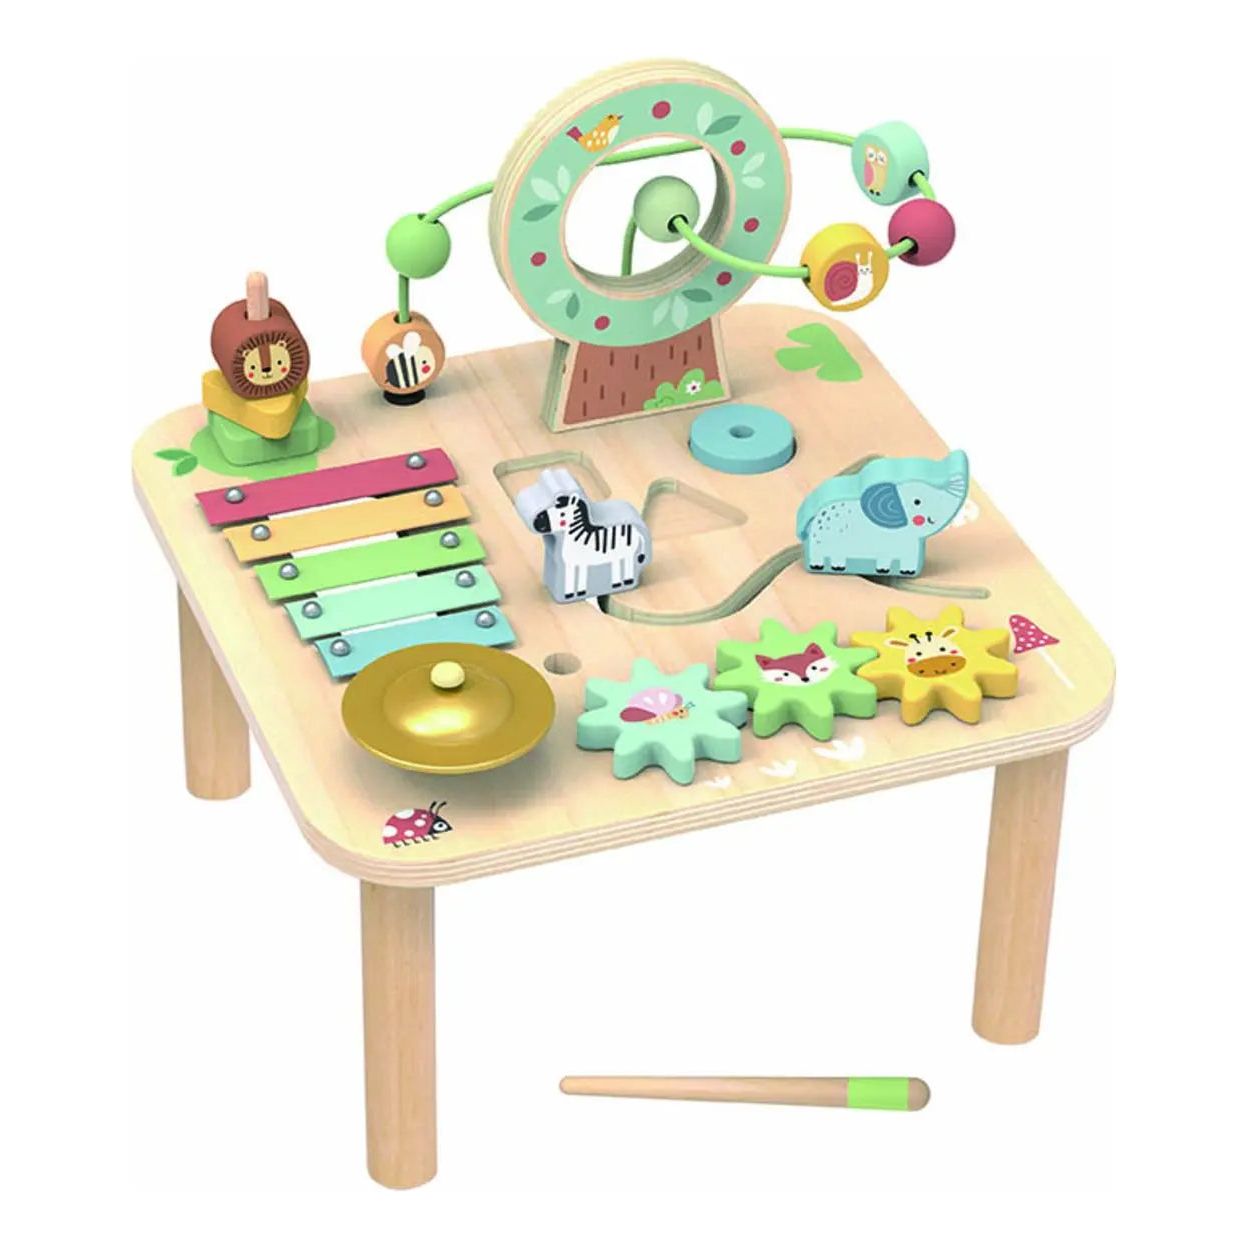 Tooky Toy Wooden Forest Activity Table Tooky Toy